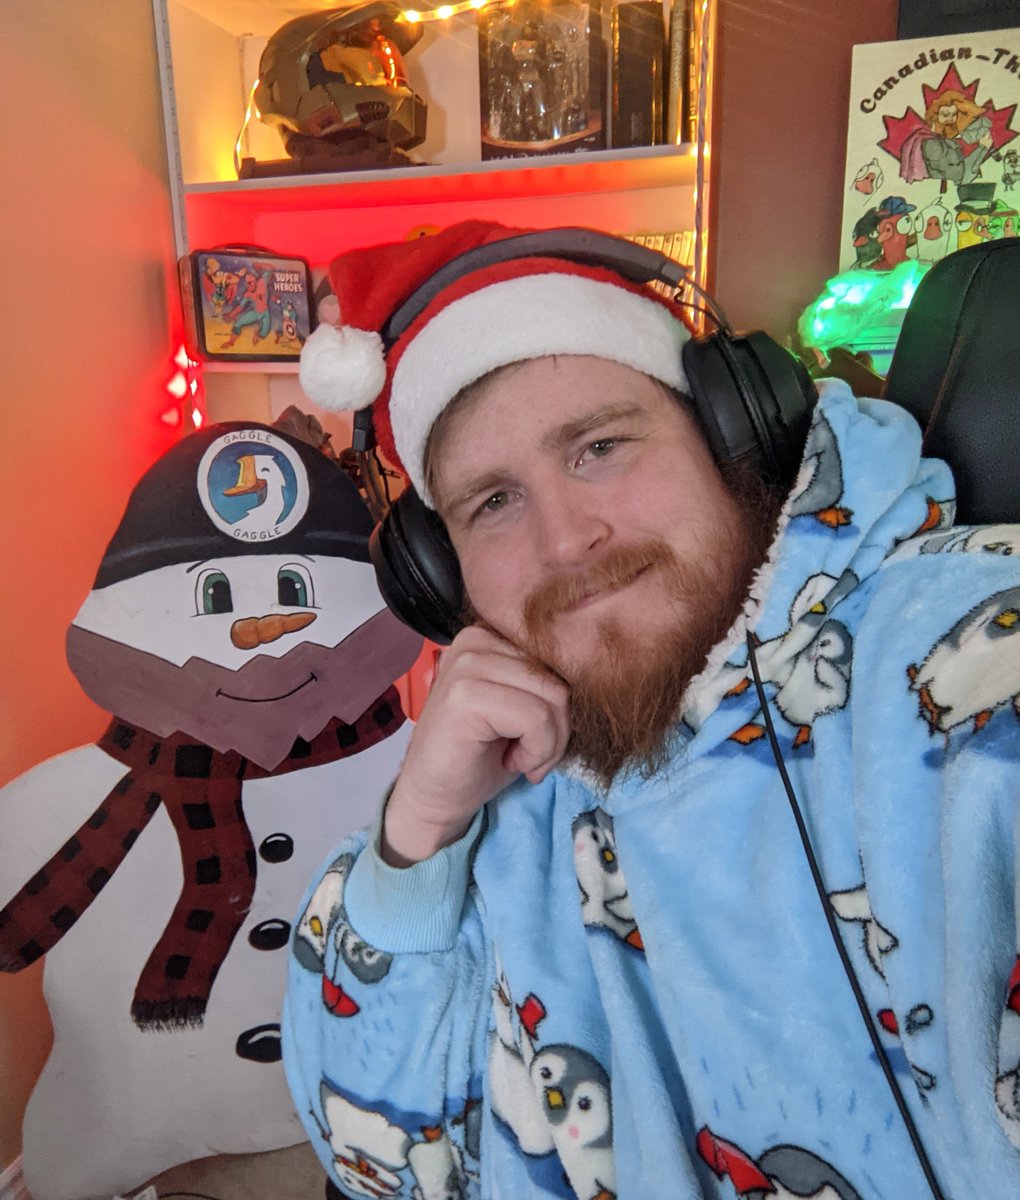 LIVE NOW Make-a-Wish Canada Charity Bash Stream! Giveaways! Incentives! Deco-beard milestones! Supporting an amazing cause over at https://t.co/p73HFDn2Sf https://t.co/0zR9Qoasvp